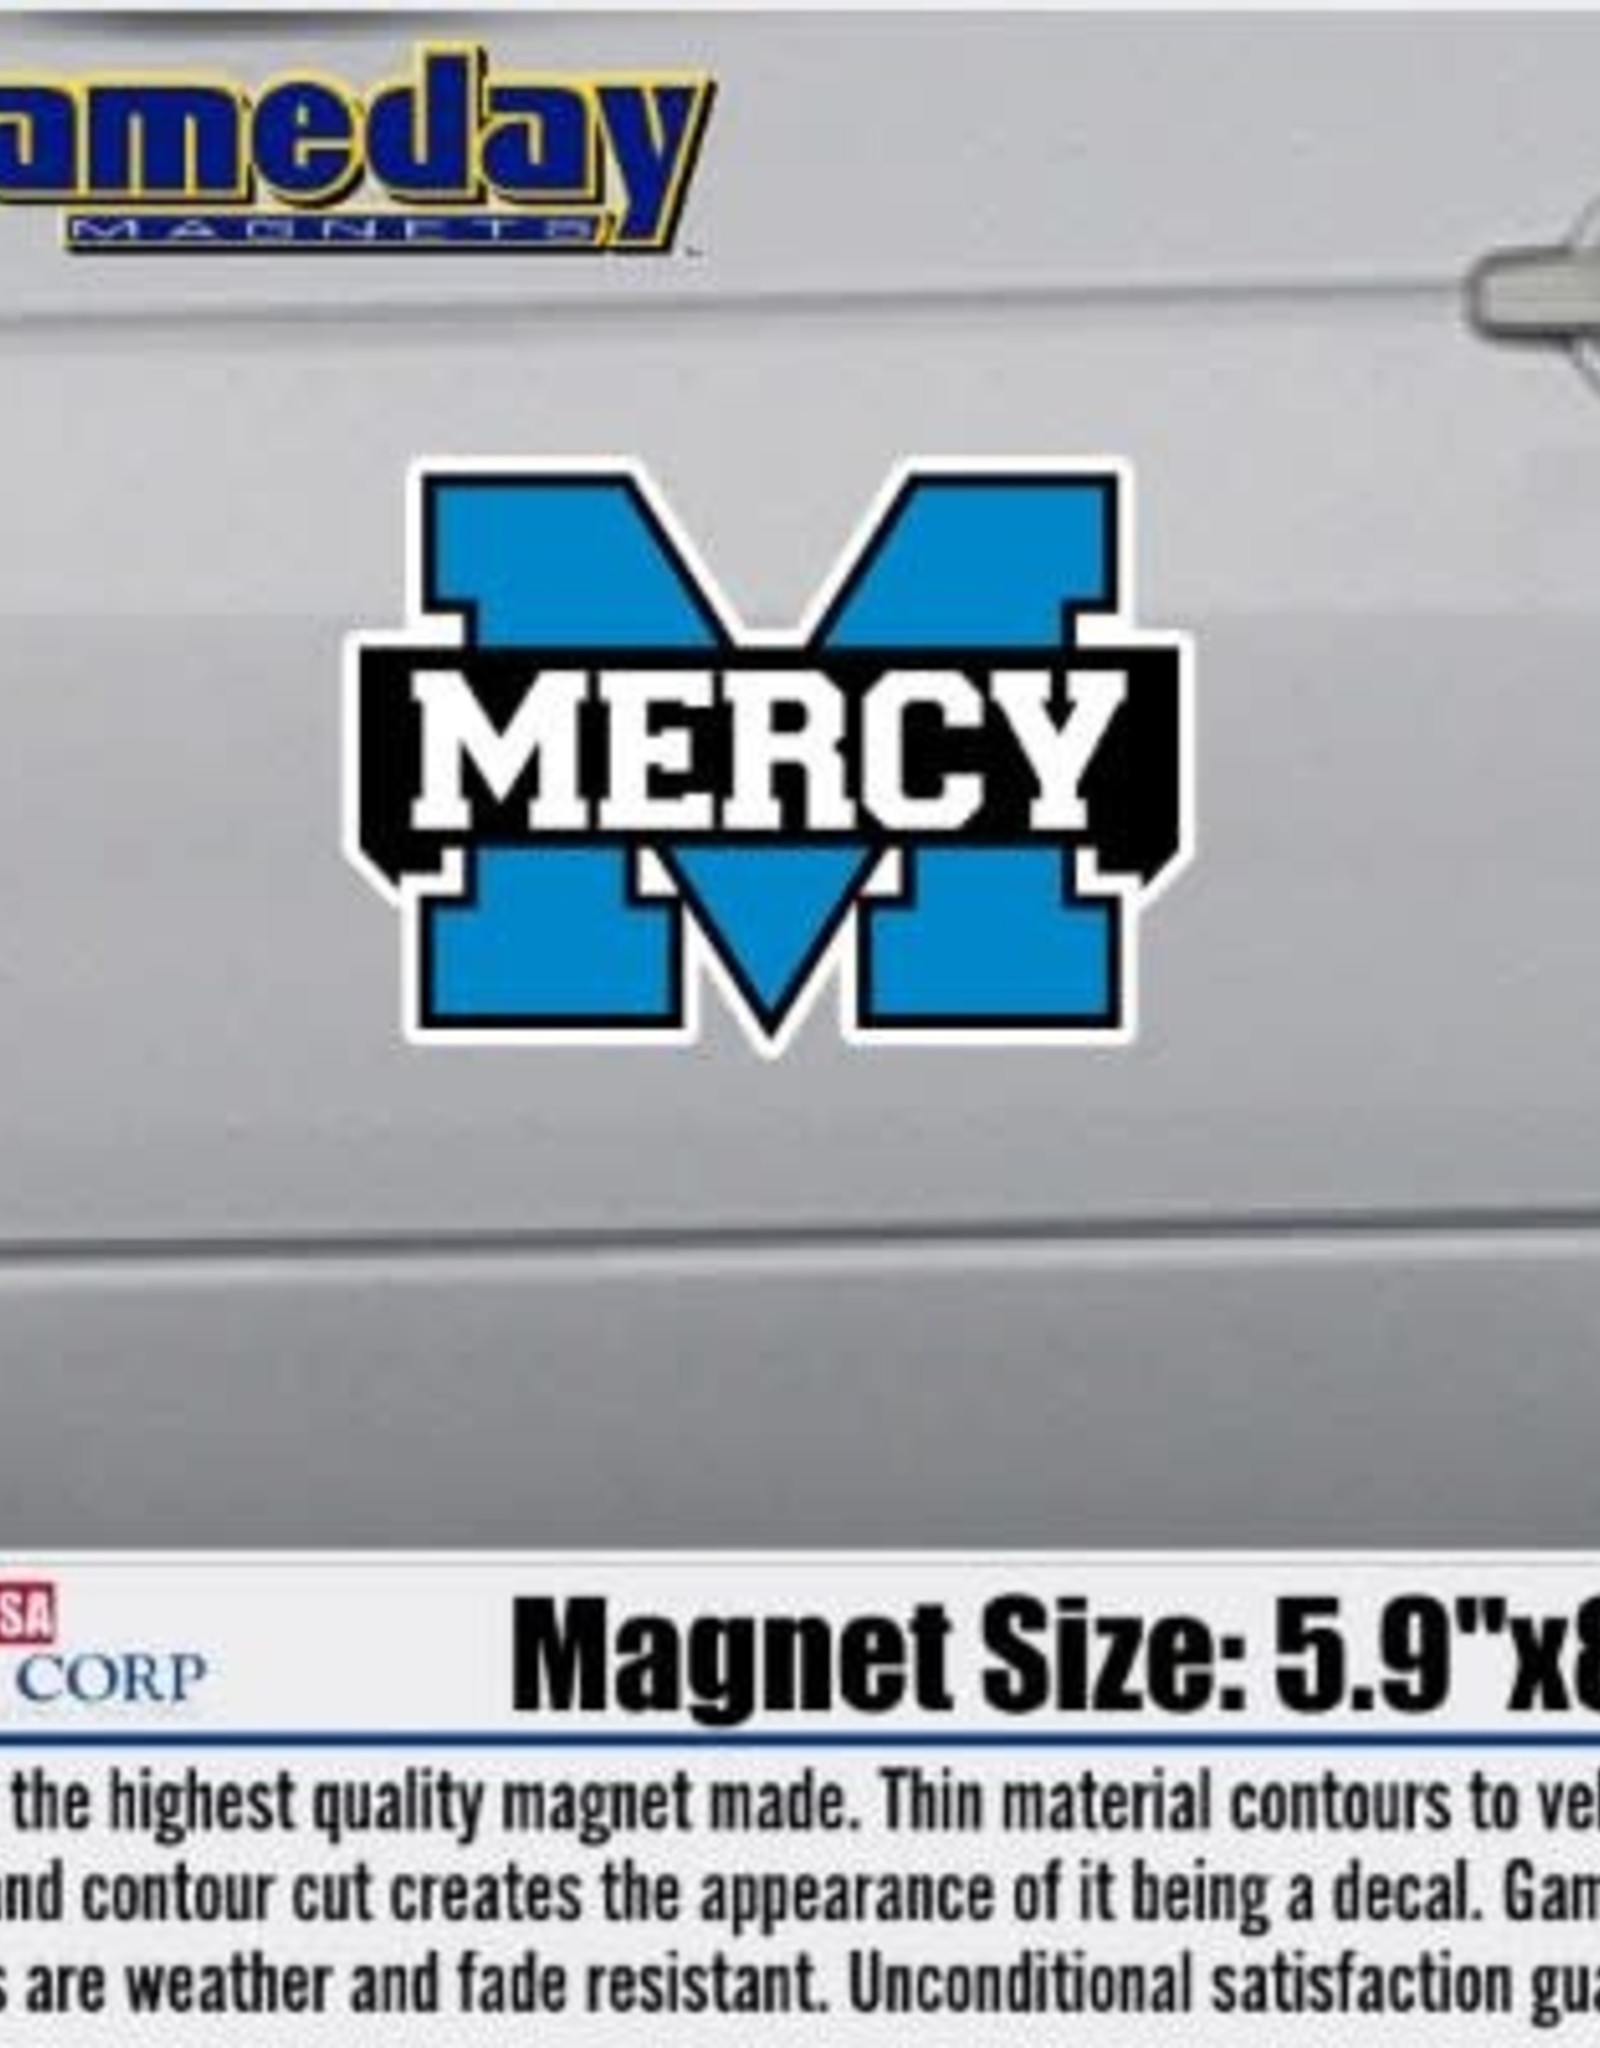 CDI Corp Mercy Gameday Magnet